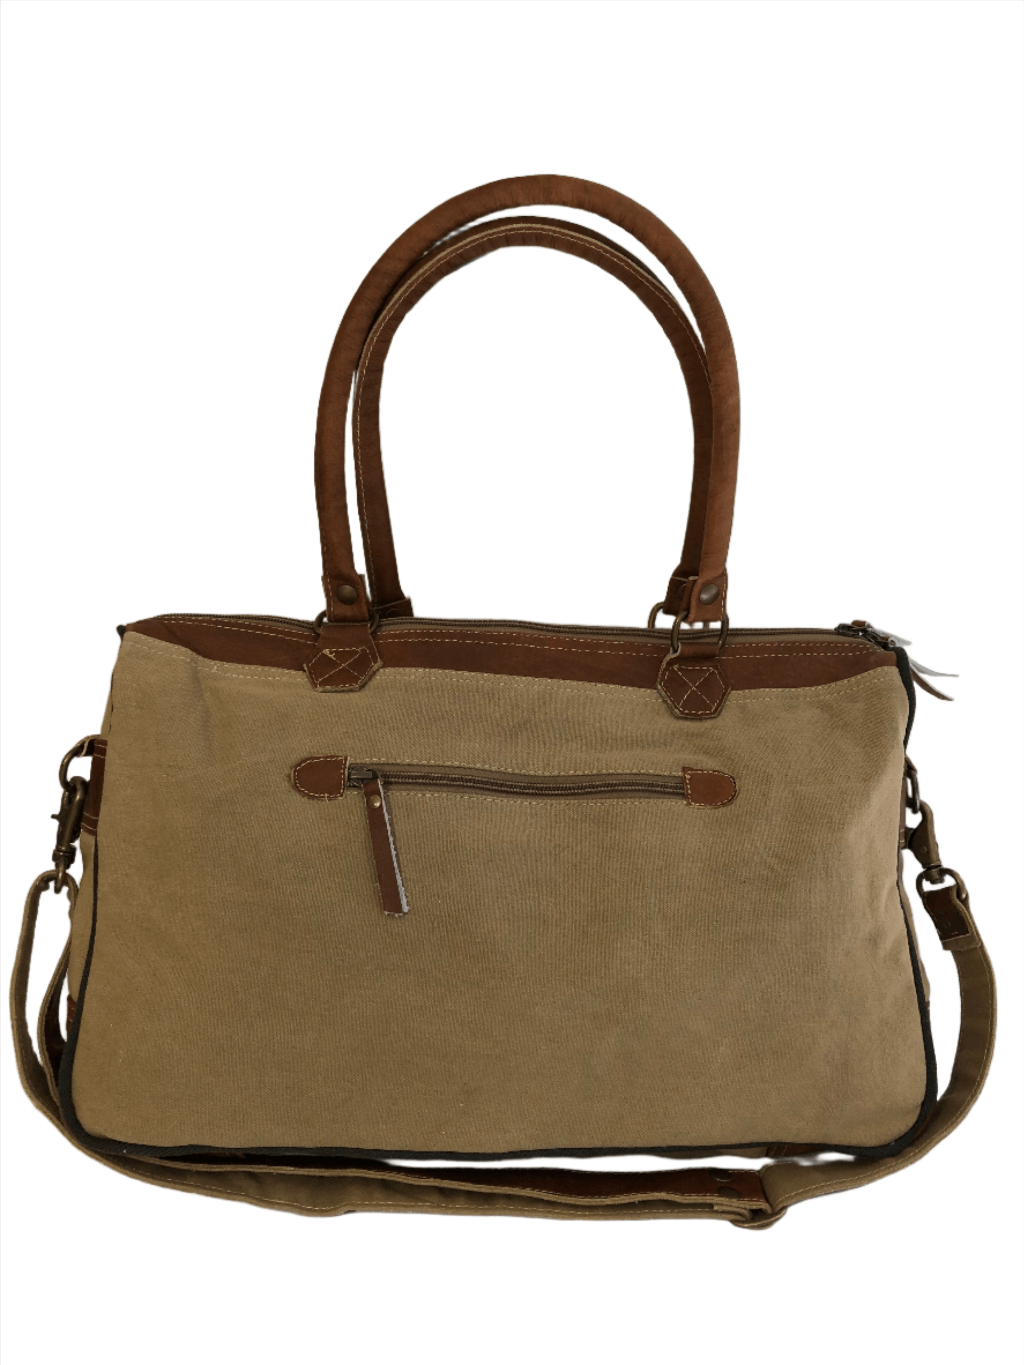 Double Strapped Grand Bazar Shoulder Bag Back Relaxed View